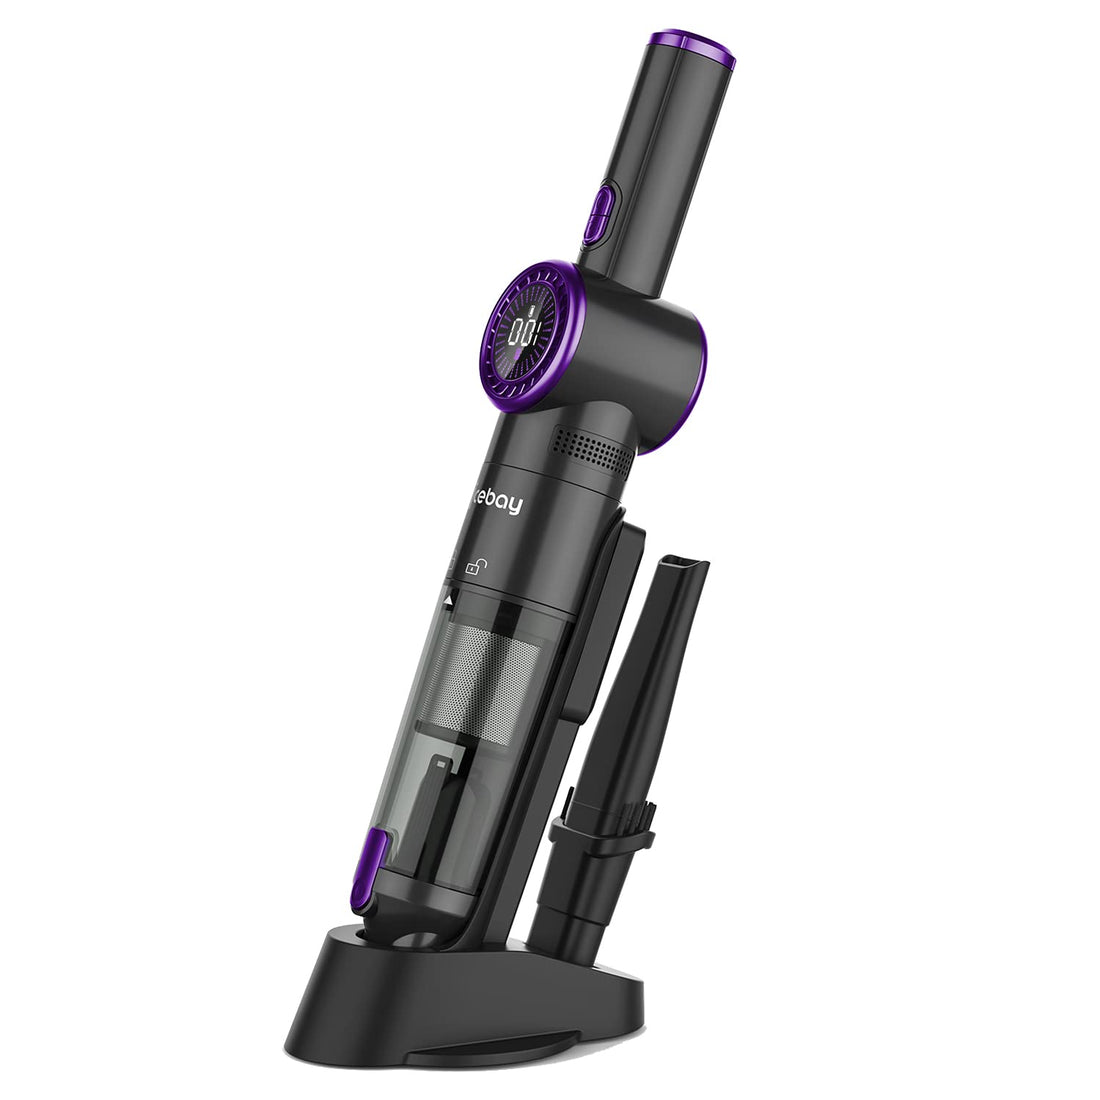 Nicebay Hand Vacuum, Lightweight Hand Vacuum Cleaner with LED Display.15KPA Strong Suction,Fast Charging Dock, Rechargeable Hand Held Vacuum, Black & Purple